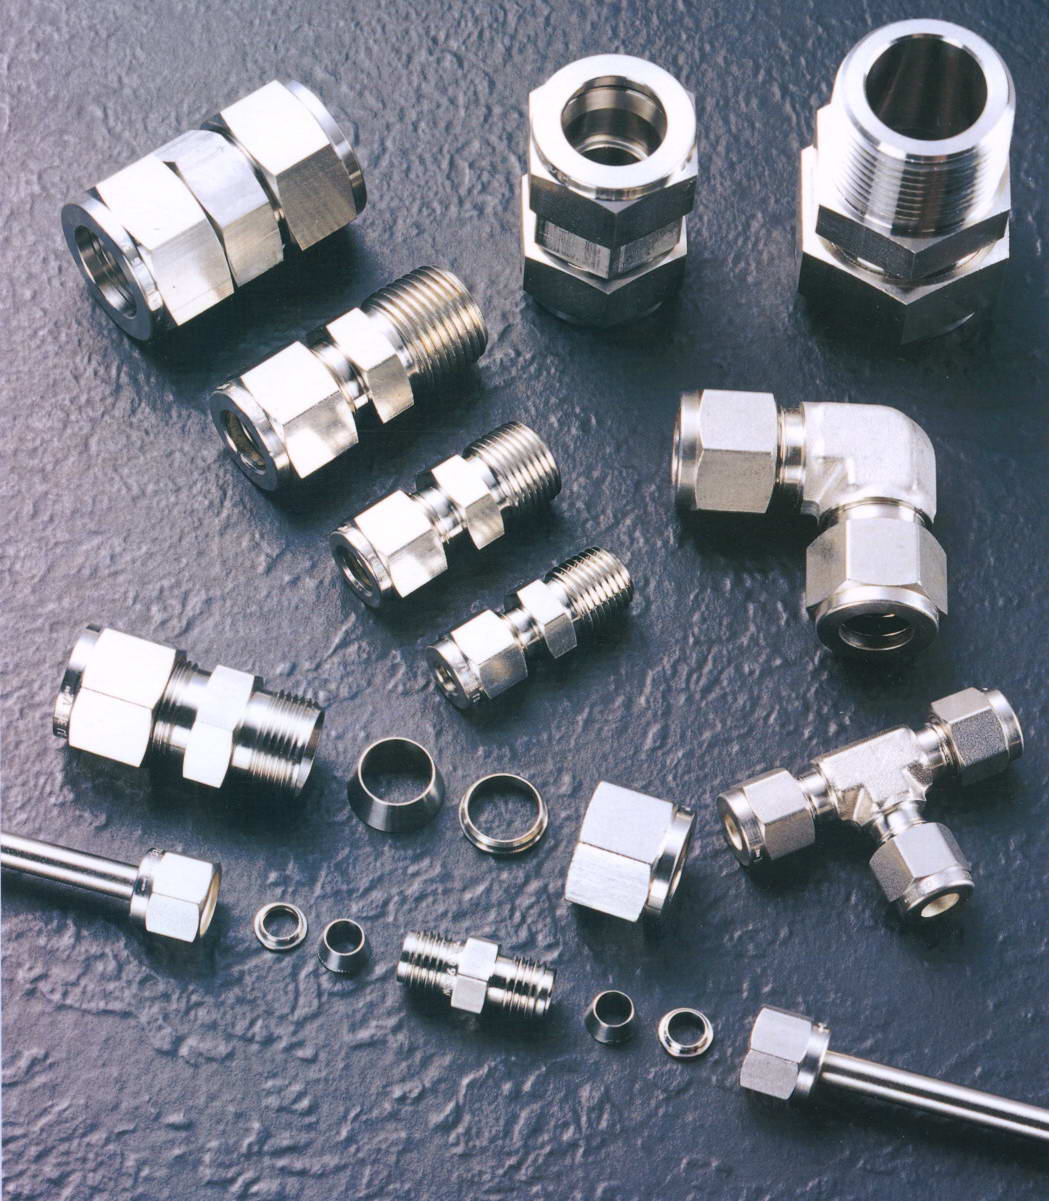 Stainless Steel Tube Fittings/High Purity Tube Fittings/SWG/Instrumentation Fittings